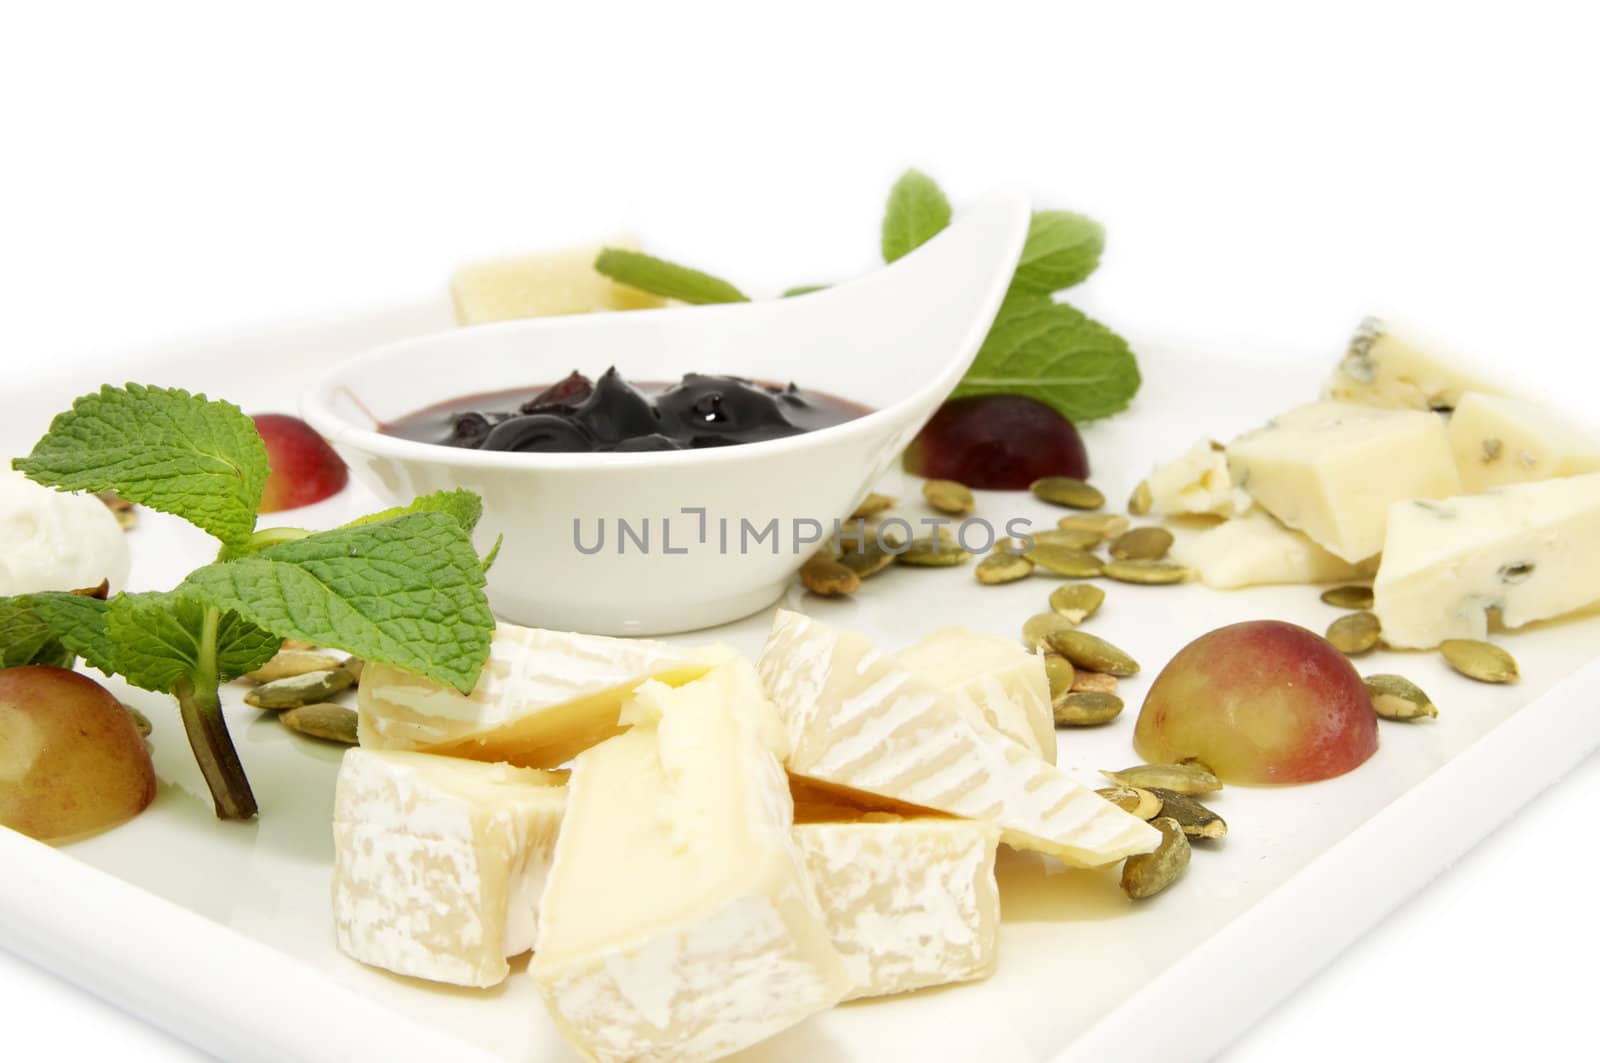 cheese plate with a large decorated the assortment of mint